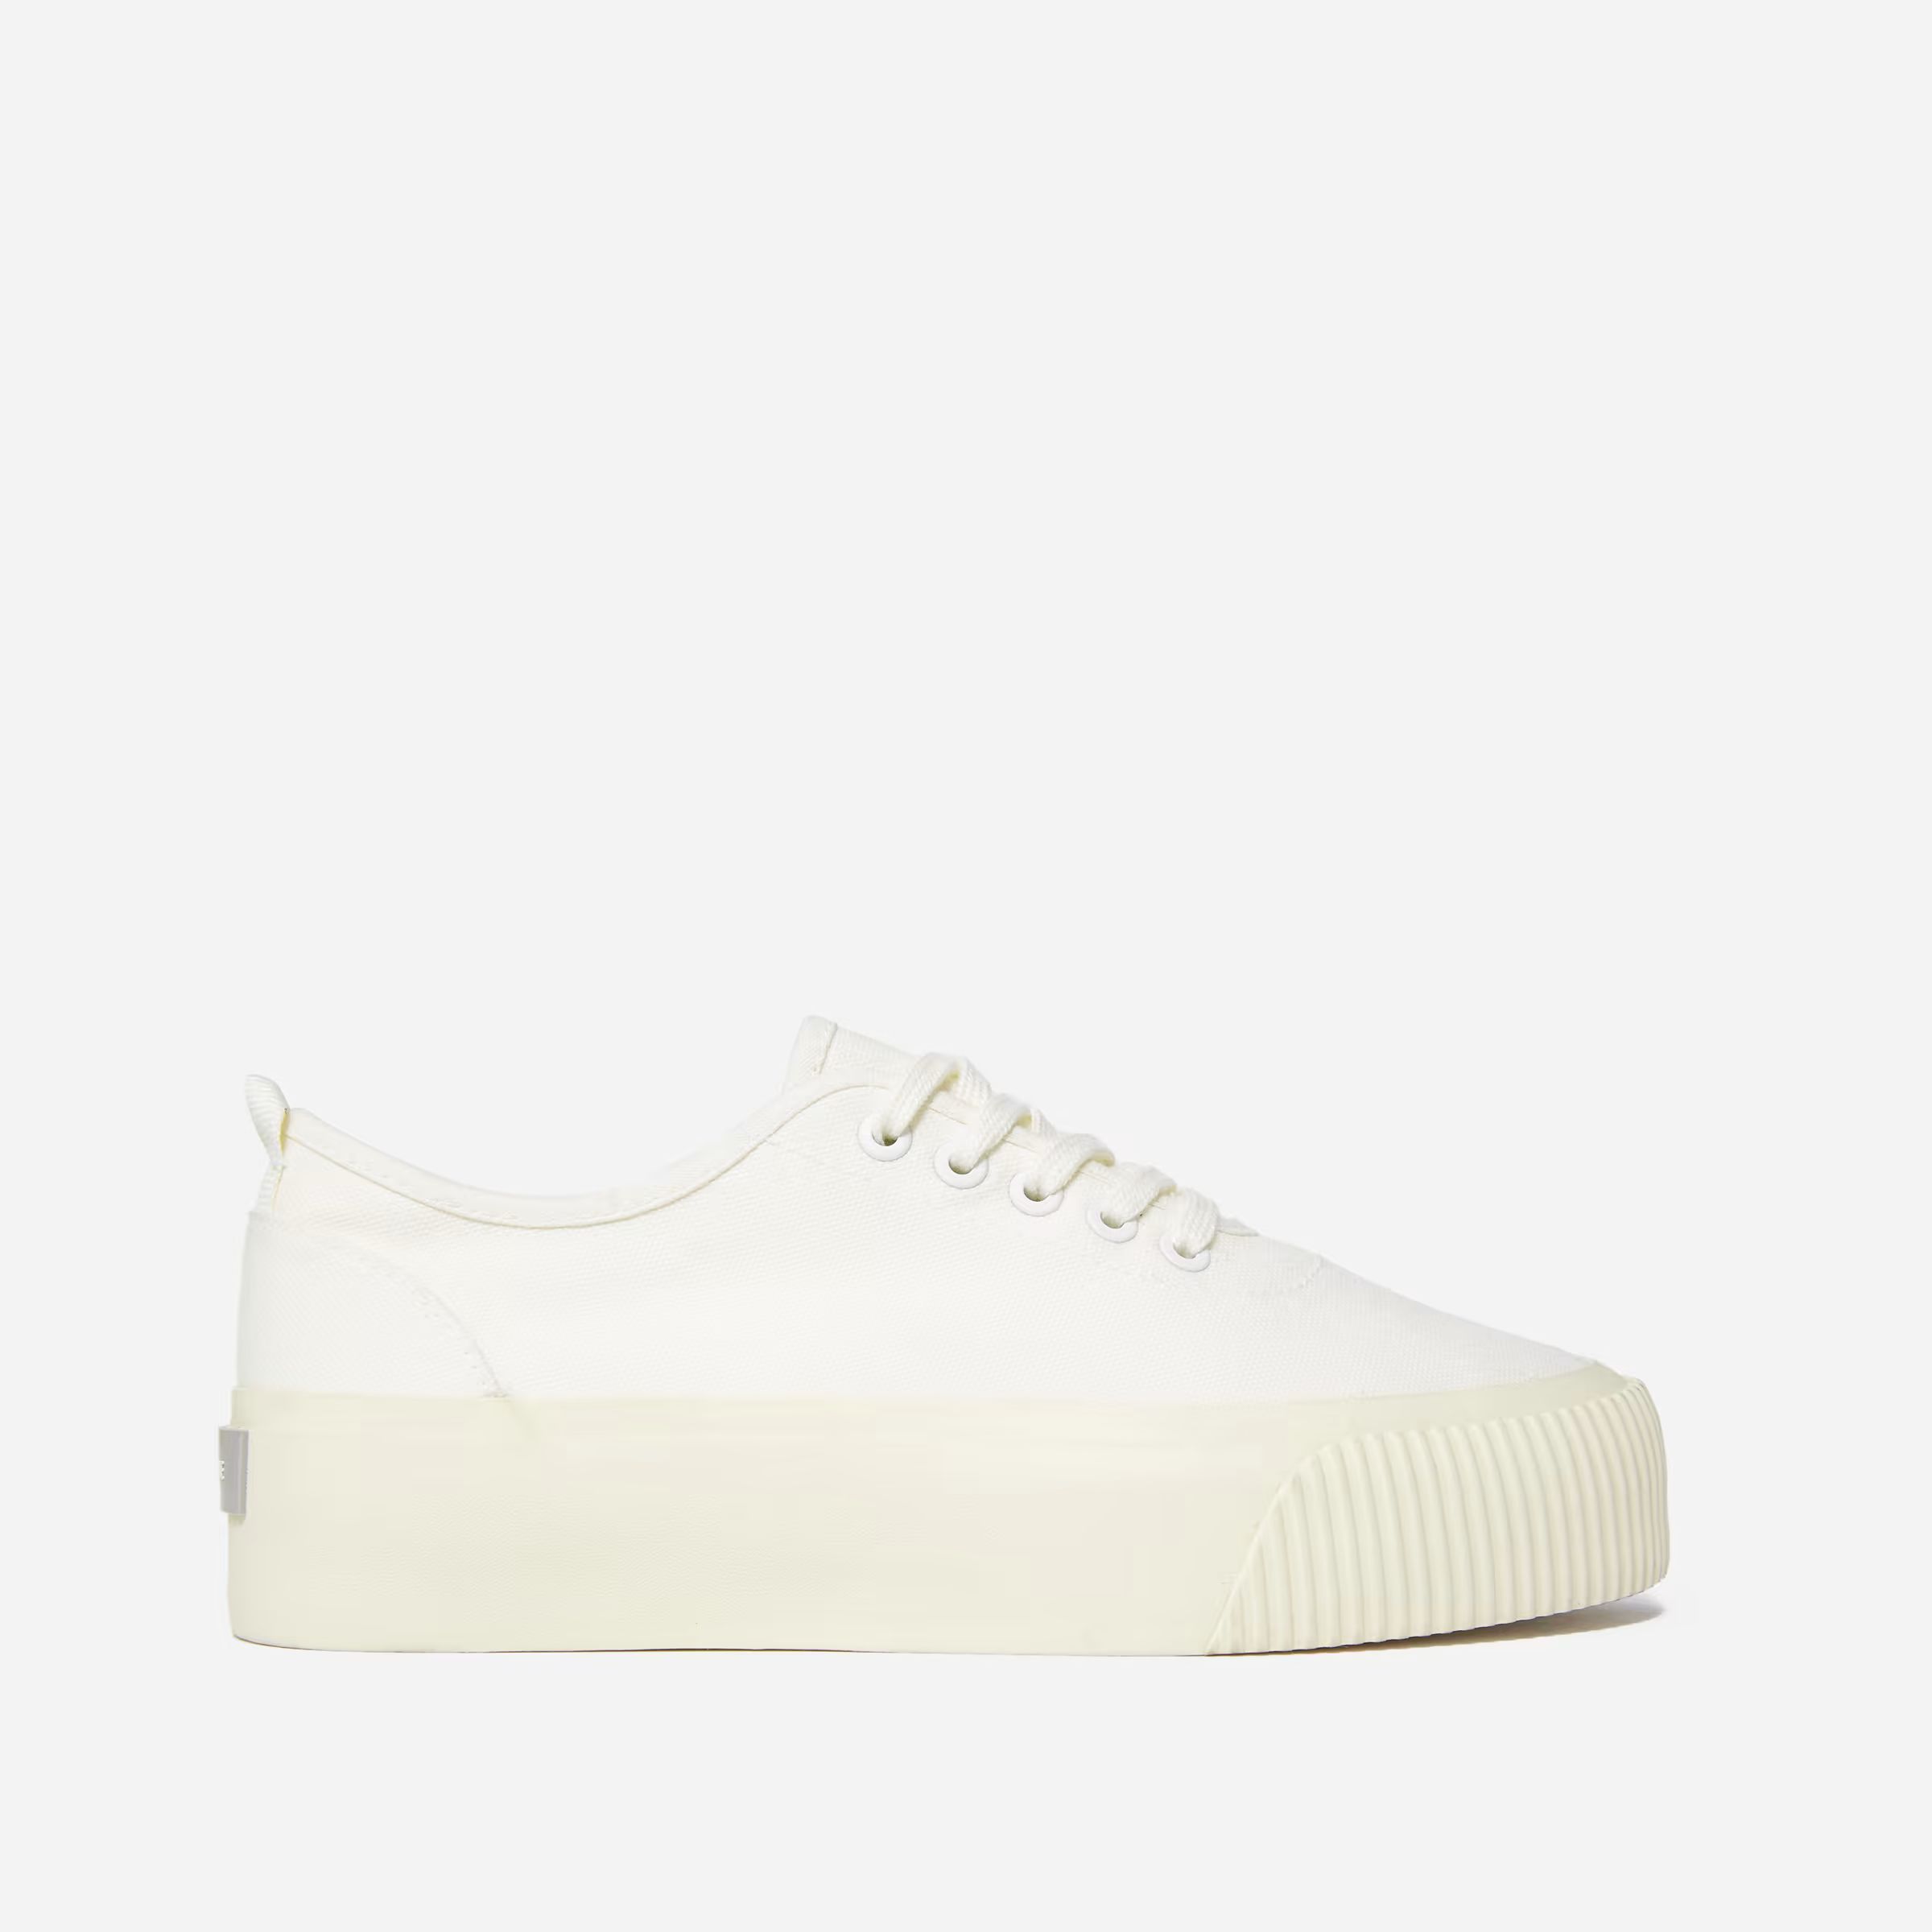 The Forever Platform Sneaker$70or 4 interest-free installments of $17.50 by  ⓘ | Everlane